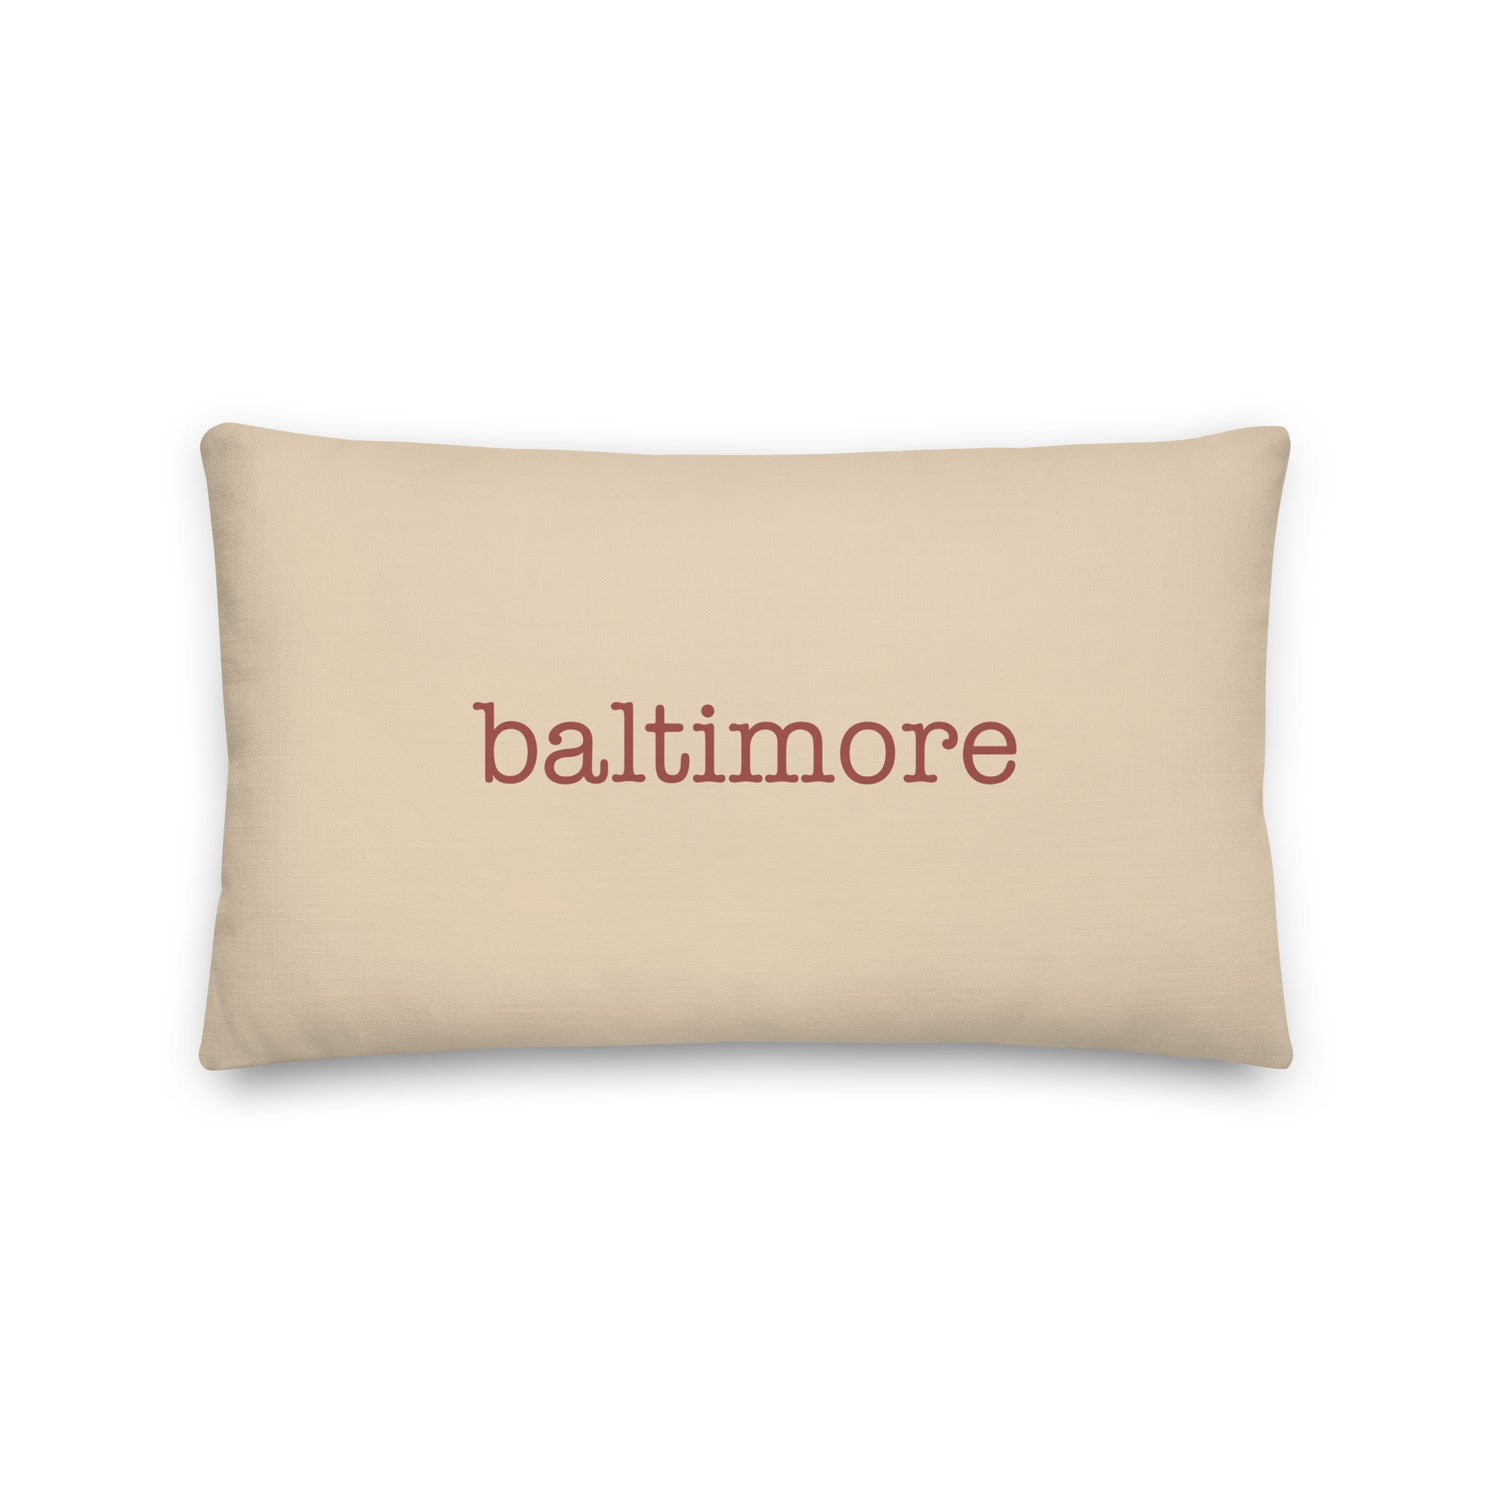 Baltimore Maryland Pillows and Blankets • BWI Airport Code